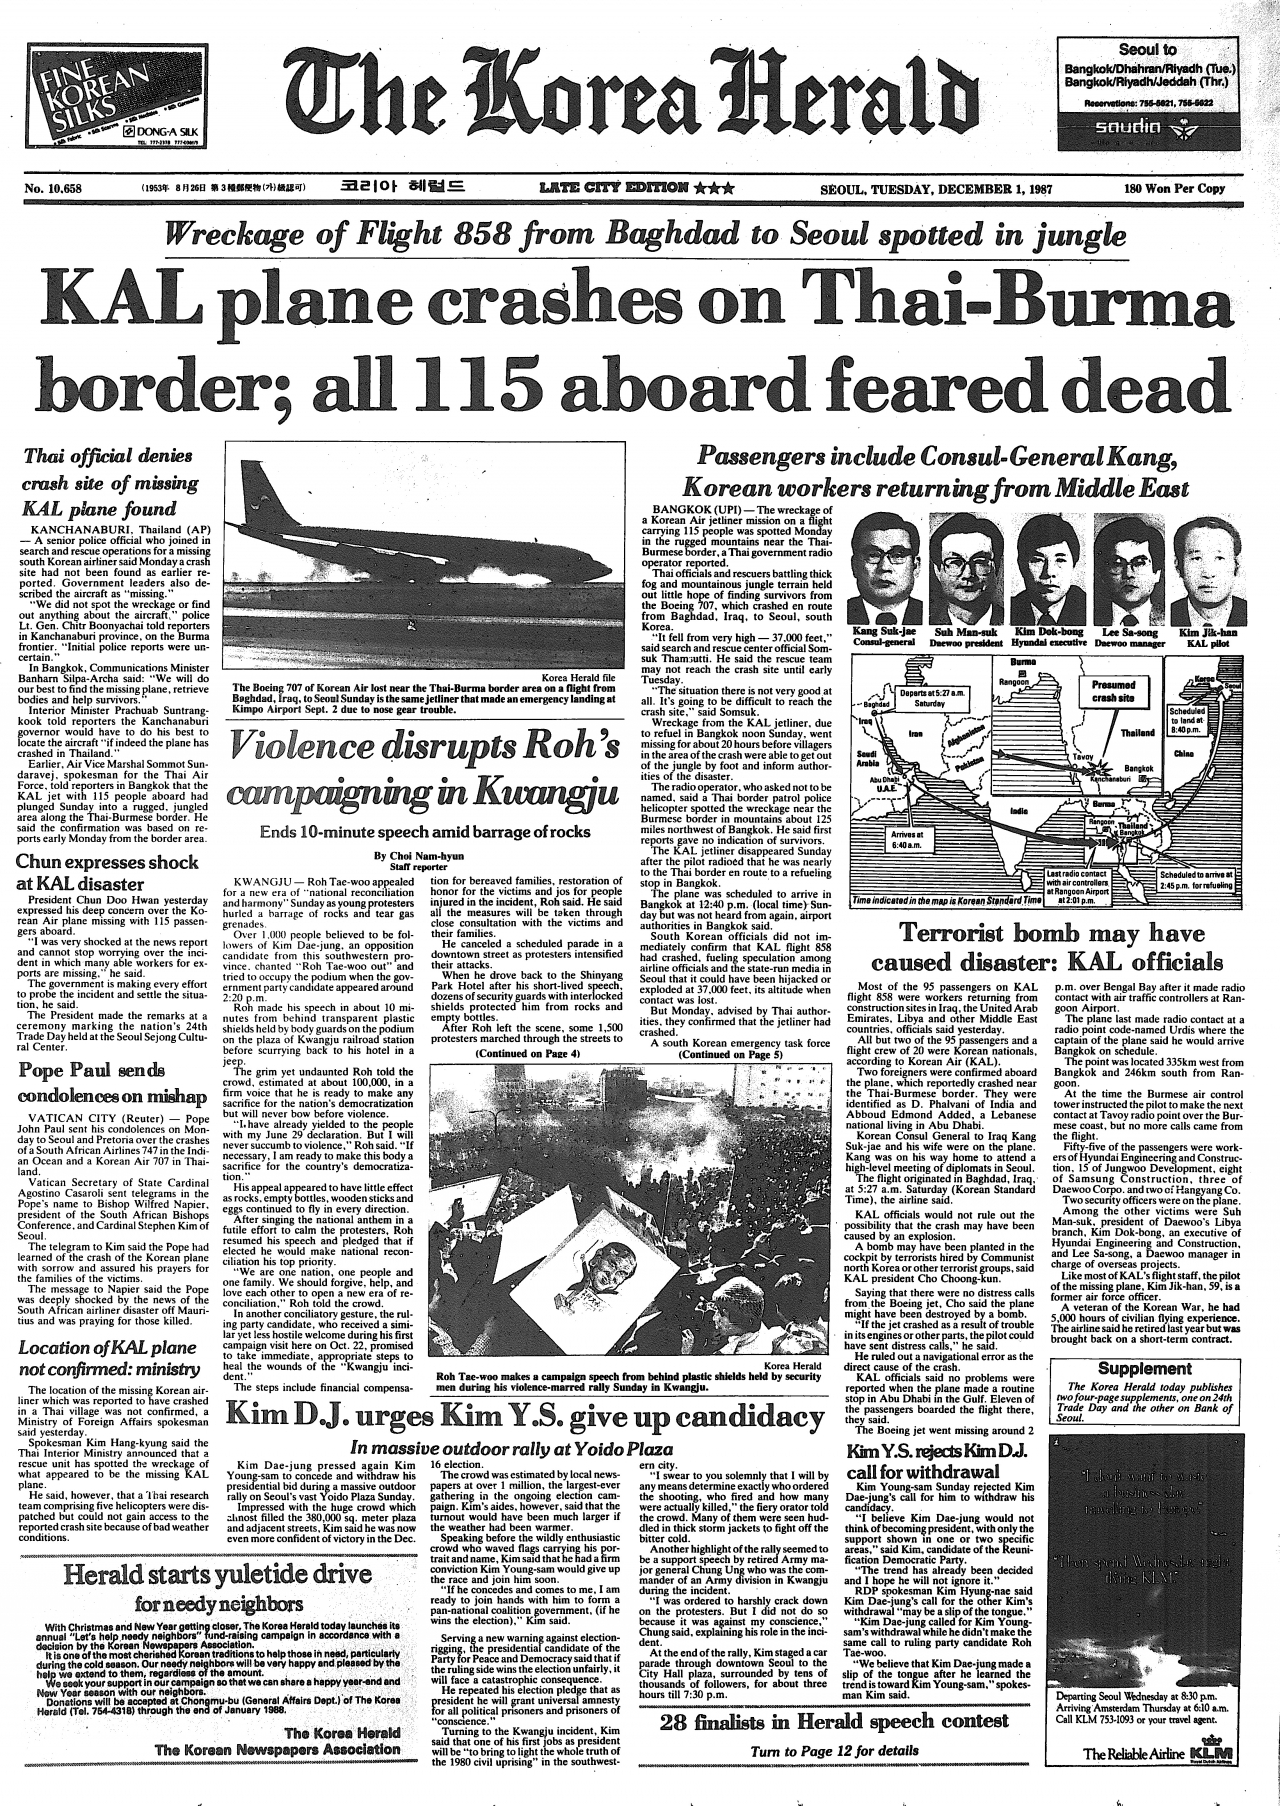 Front page of the Dec. 1, 1987 issue of The Korea Herald